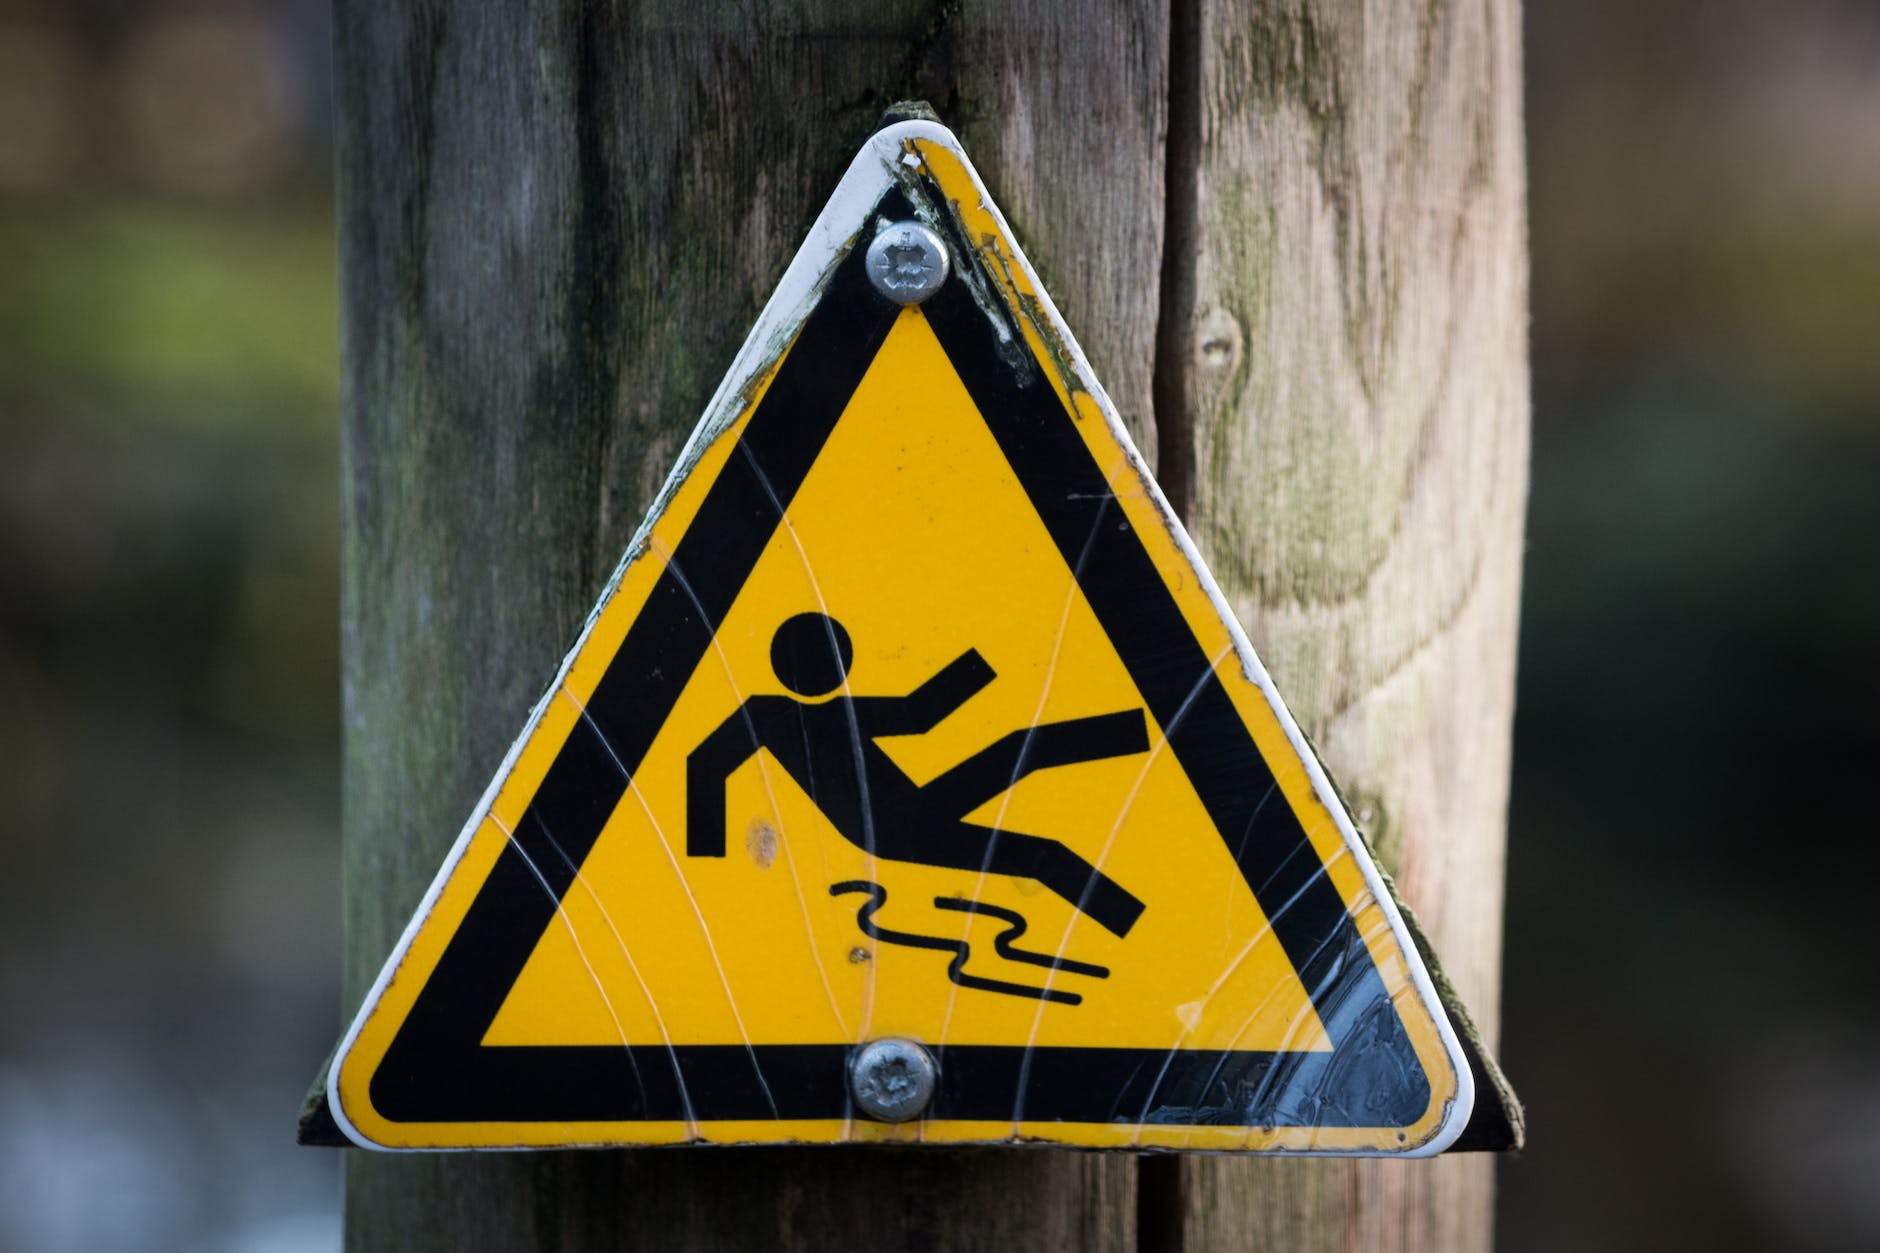 Slip Trip and Fall Safety Quiz - HSE STUDY GUIDE